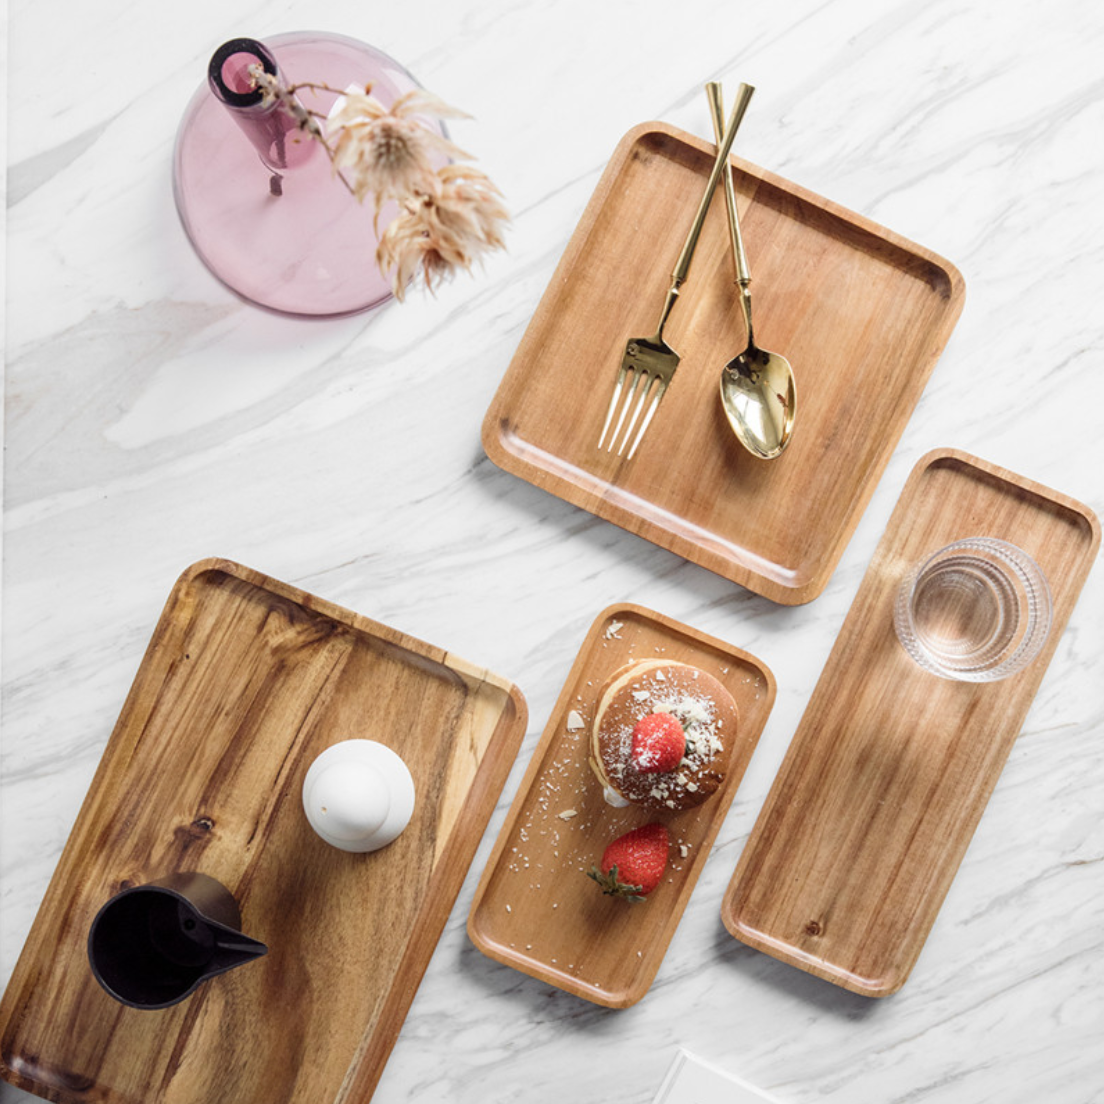 Round Wooden Tray for serving Pizza - Wooden Appetizer Platter for Breads -  Vanity Tray Set - Wood Charcuterie Board for Housewarming Gift